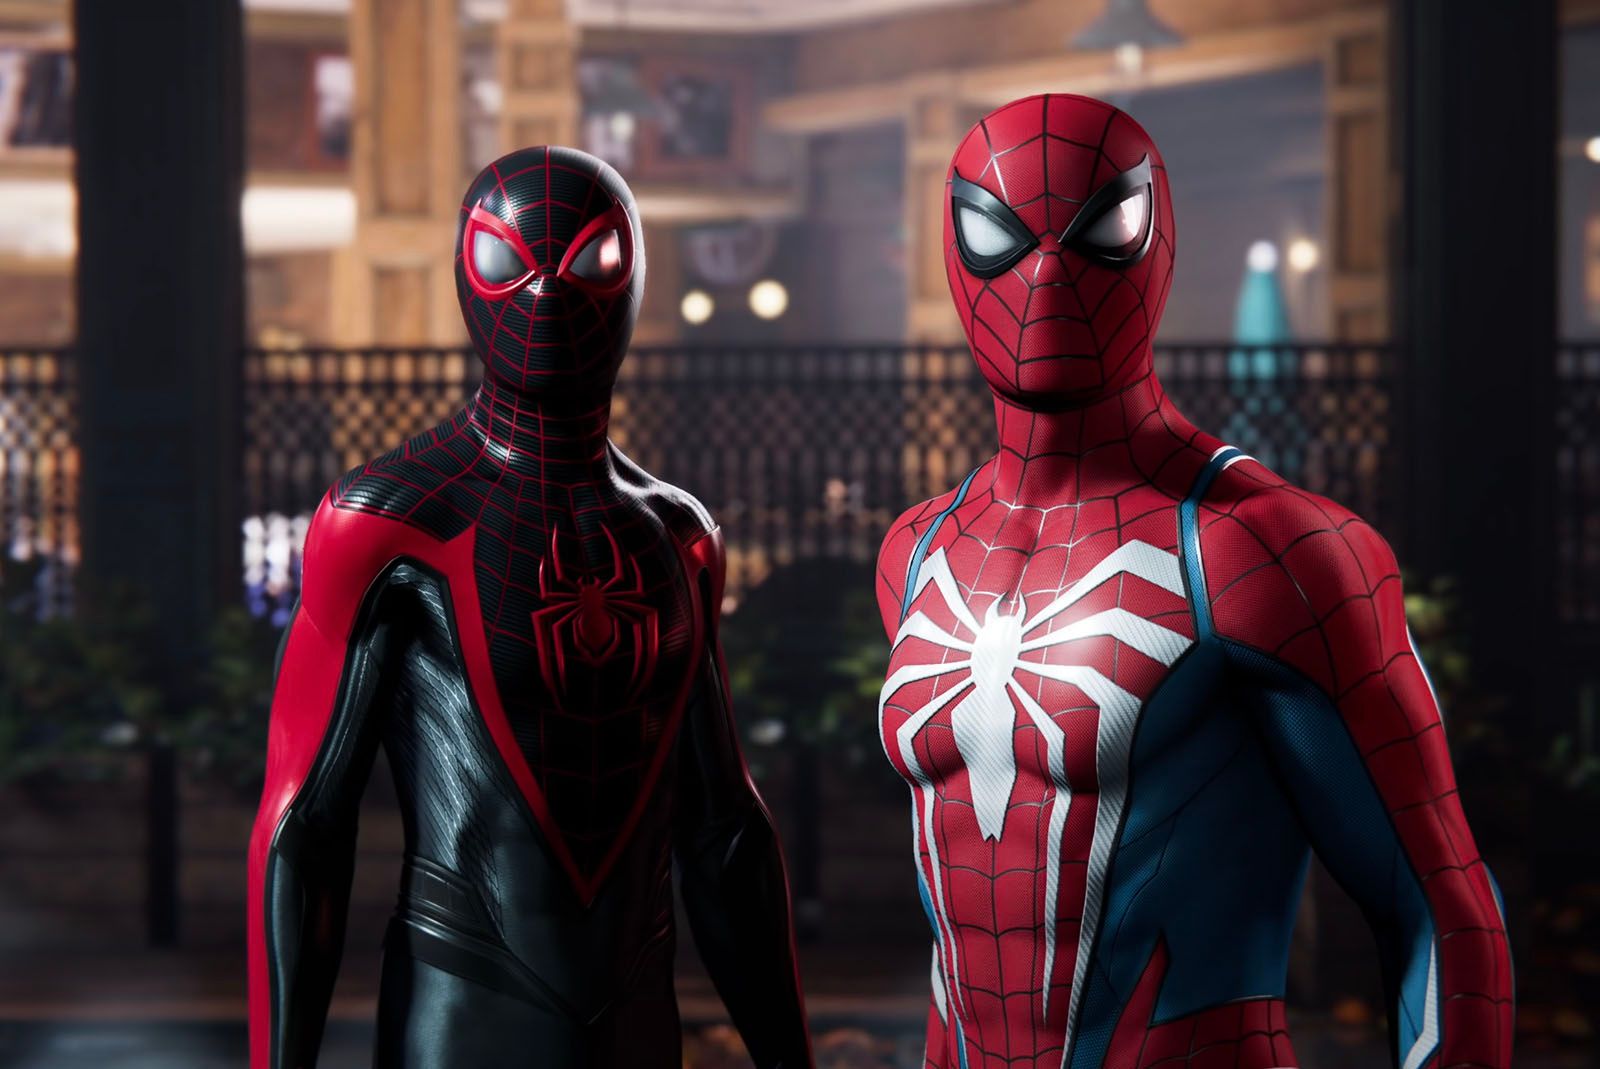 Marvel’s Spider-Man 2 will feature Venom, plus an all-new Wolverine game is headed to PS5 in 2023 photo 1